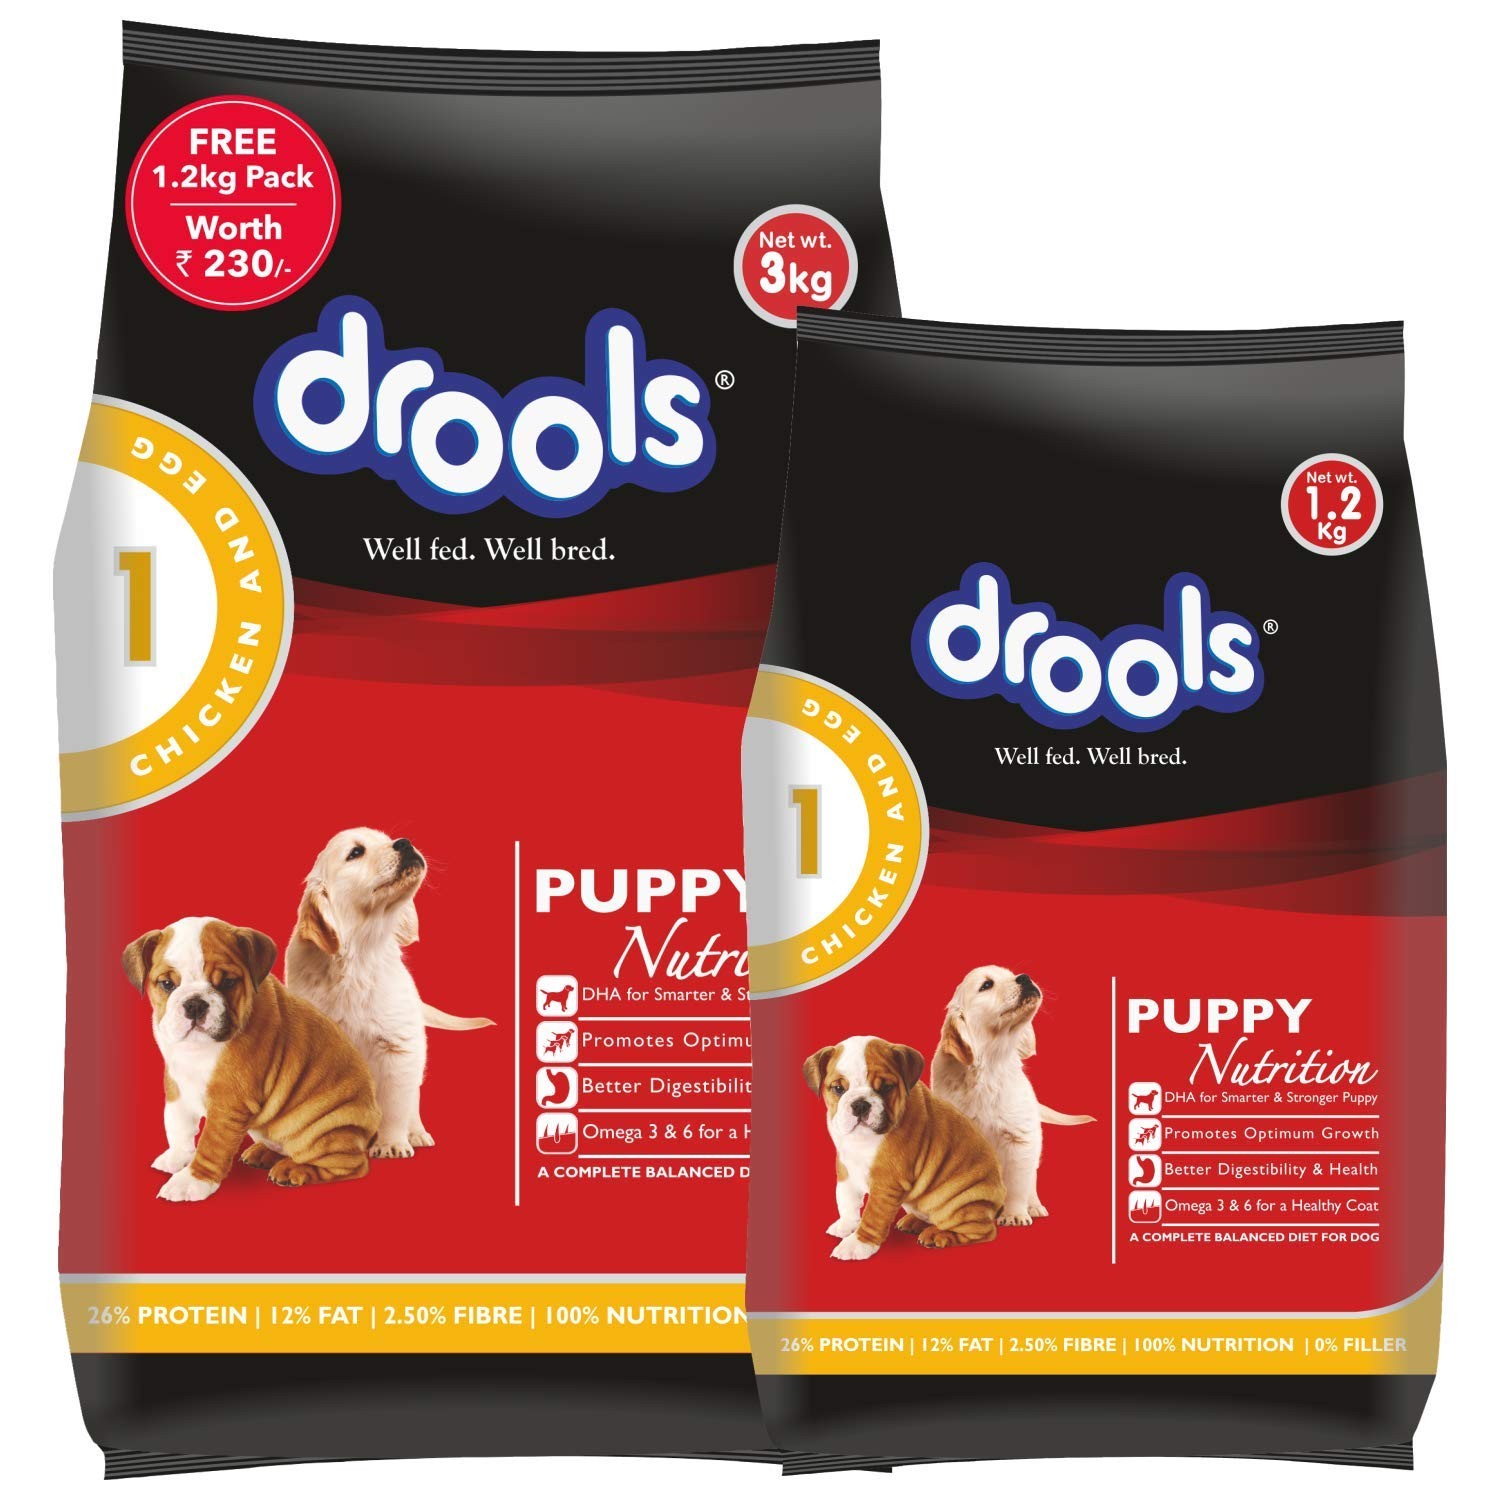 Drools Chicken and Egg Puppy Food